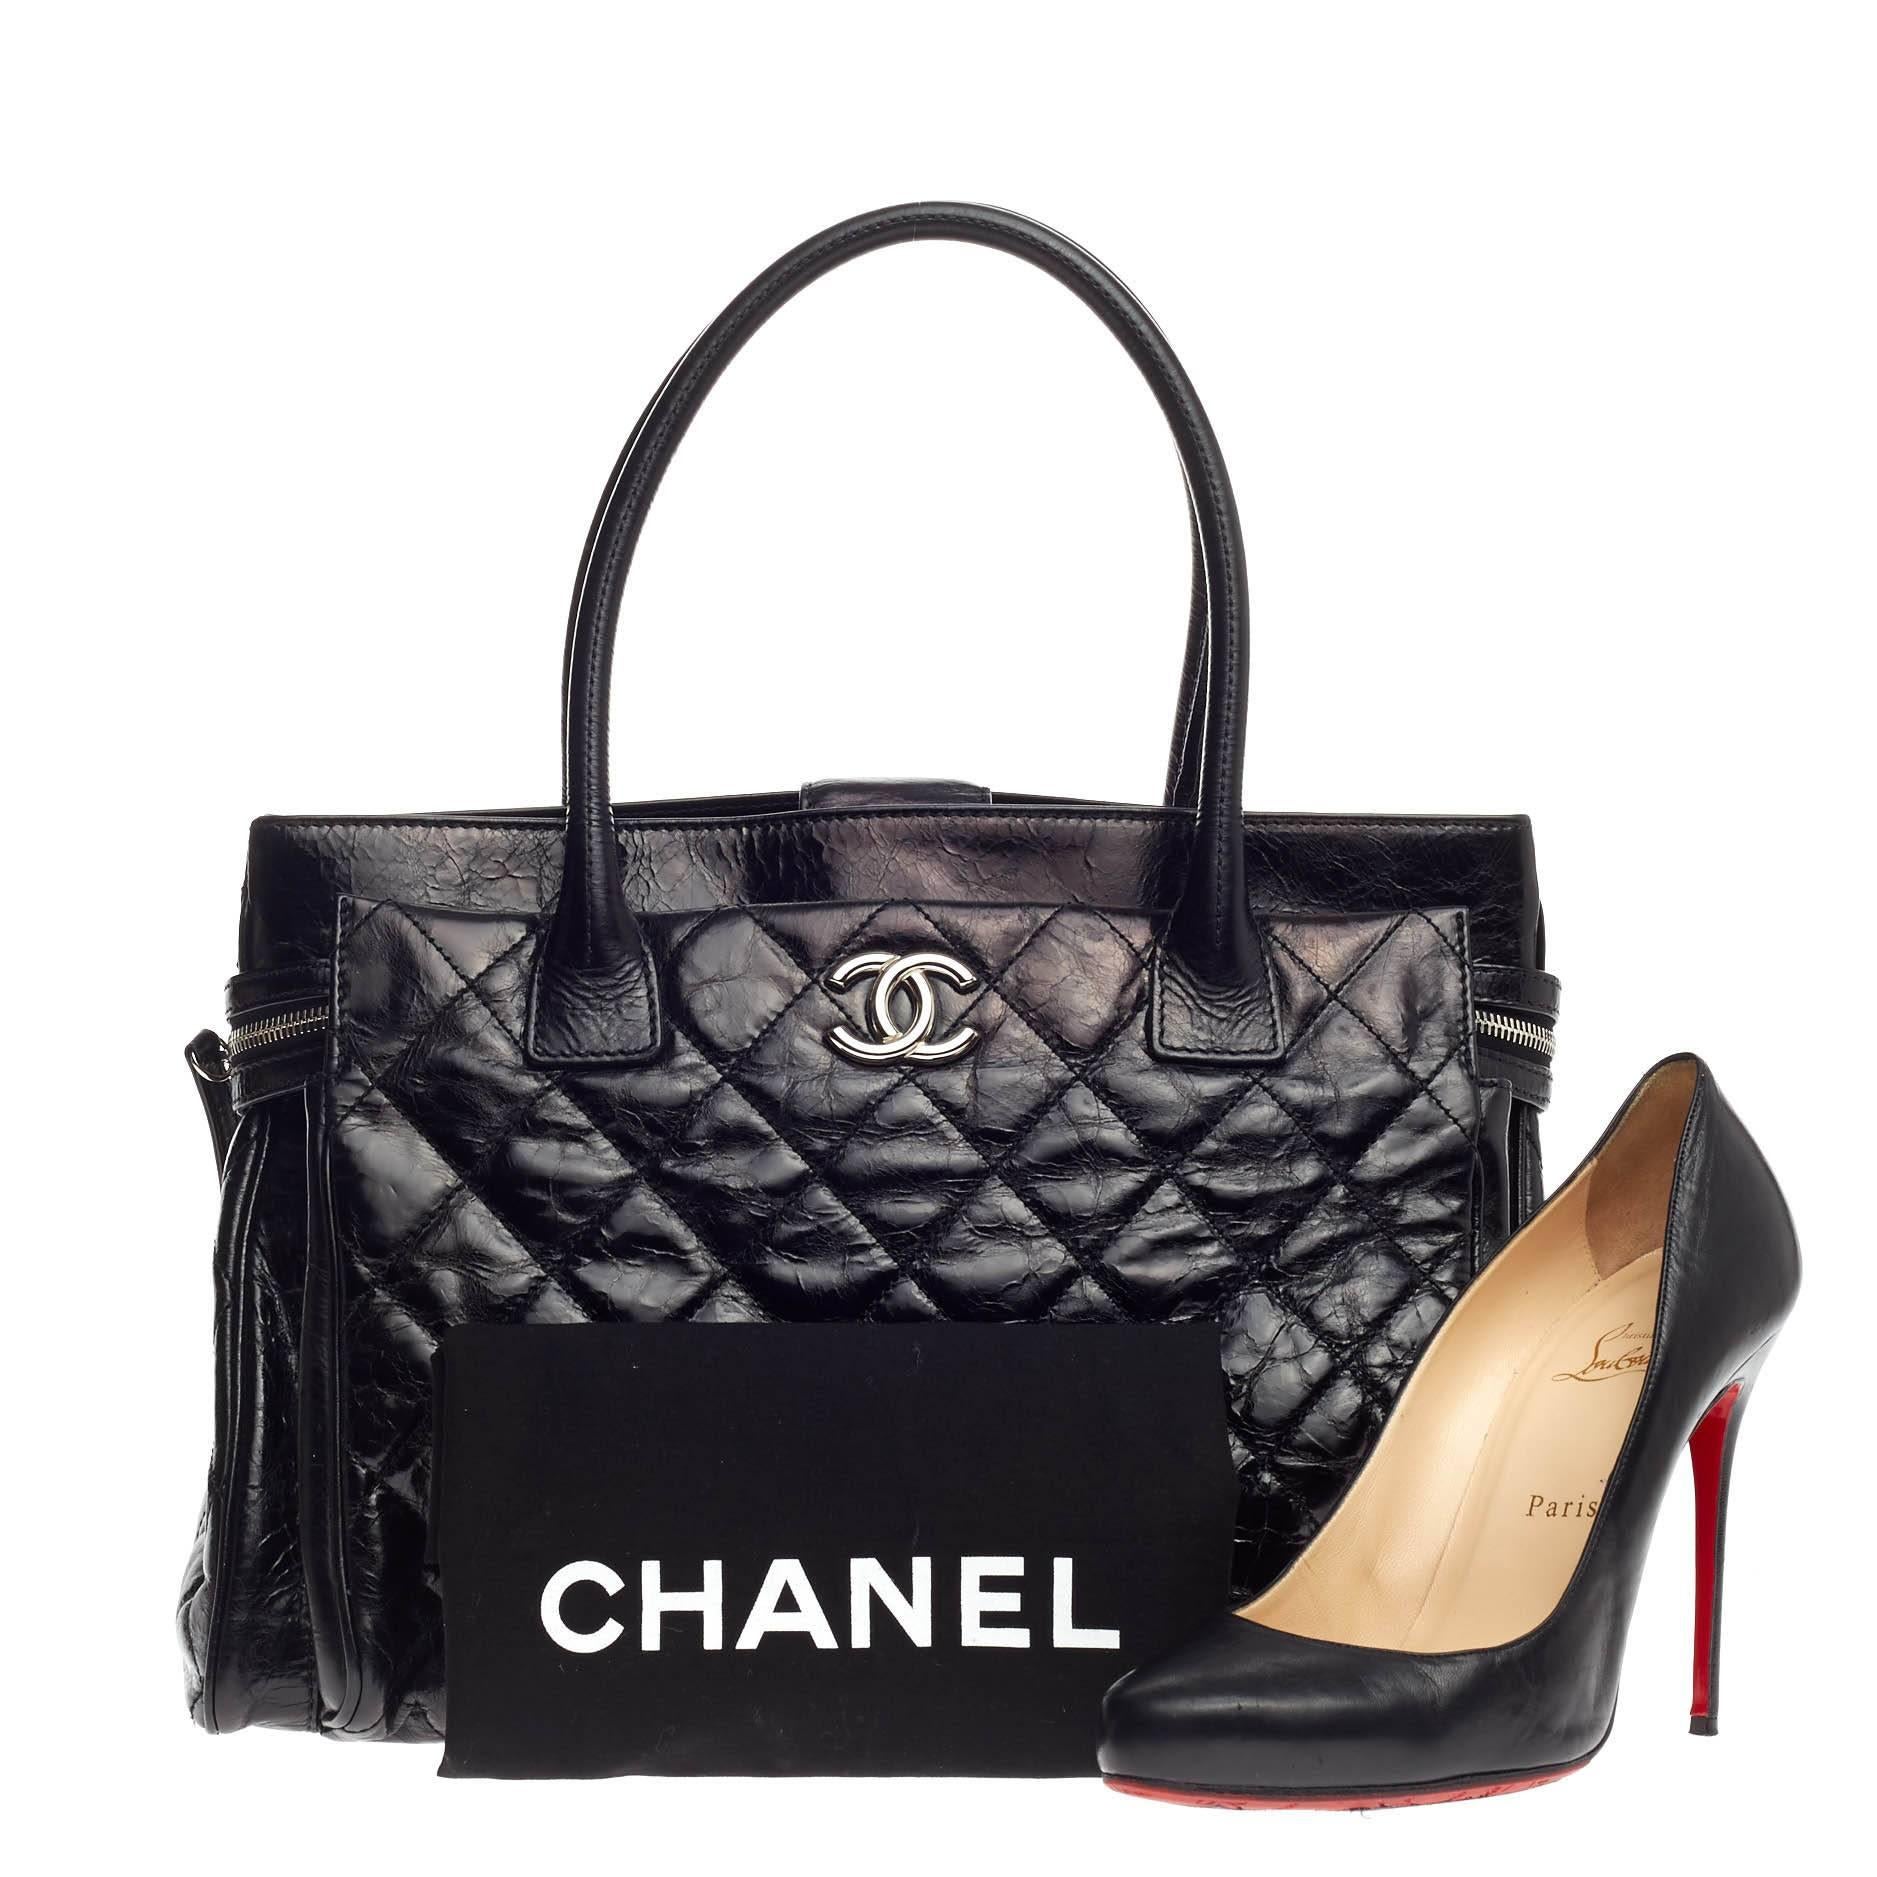 This authentic Chanel Executive Tote Quilted Glazed Calfskin Large is an ideal everyday accessory for the modern woman. Crafted from beautiful, black quilted glazed calfskin leather, this classic and functional tote features dual-rolled tall